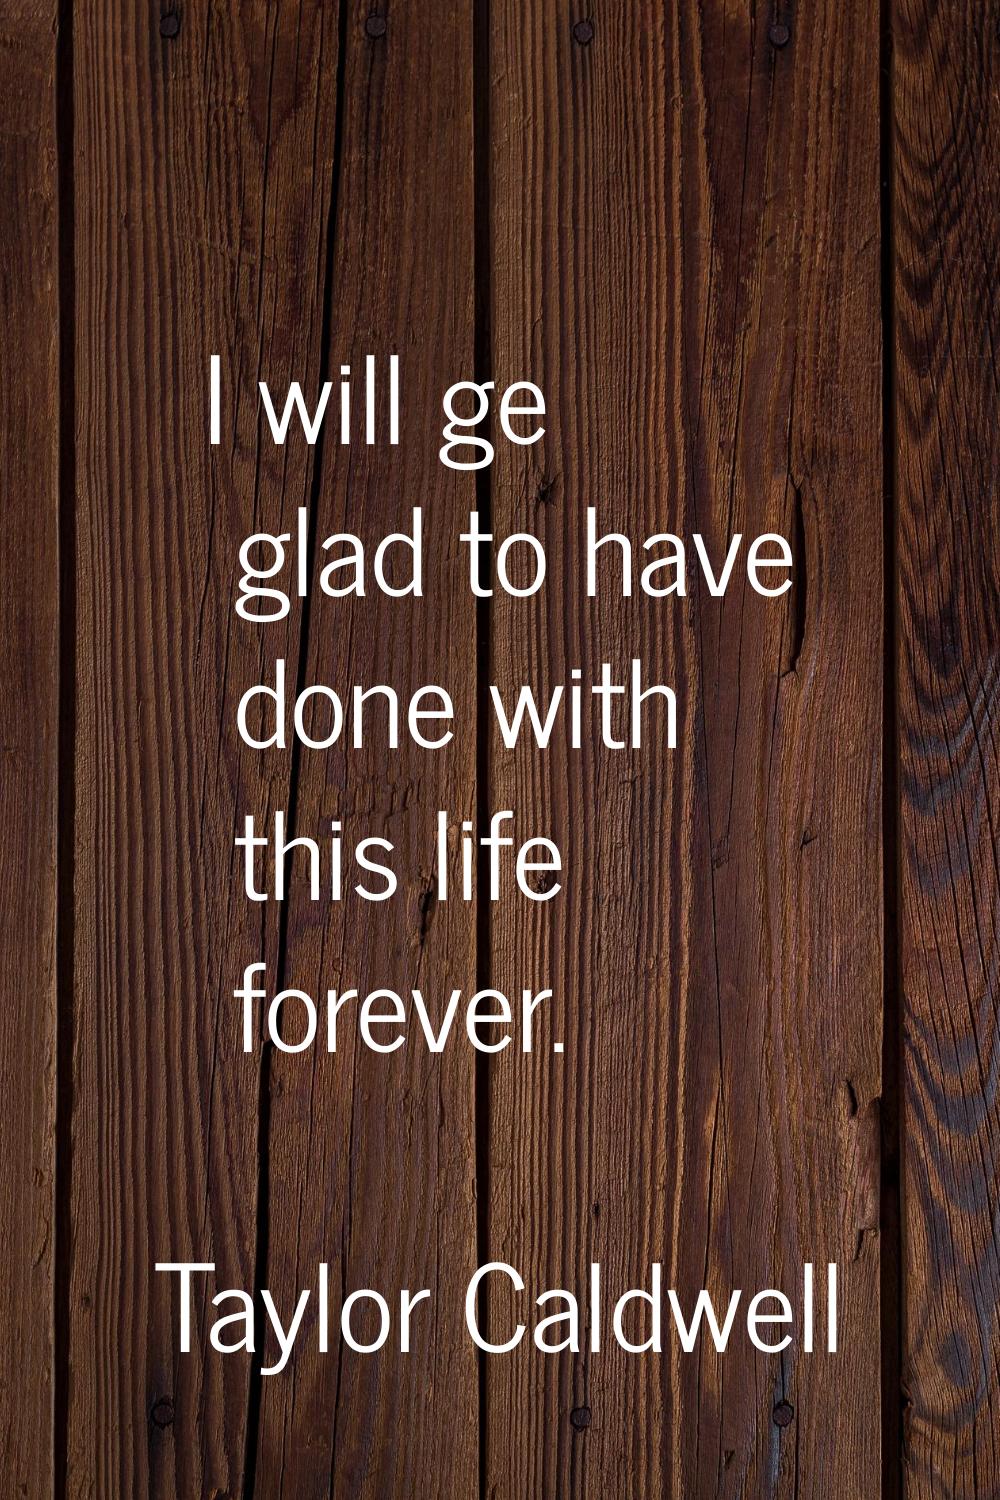 I will ge glad to have done with this life forever.